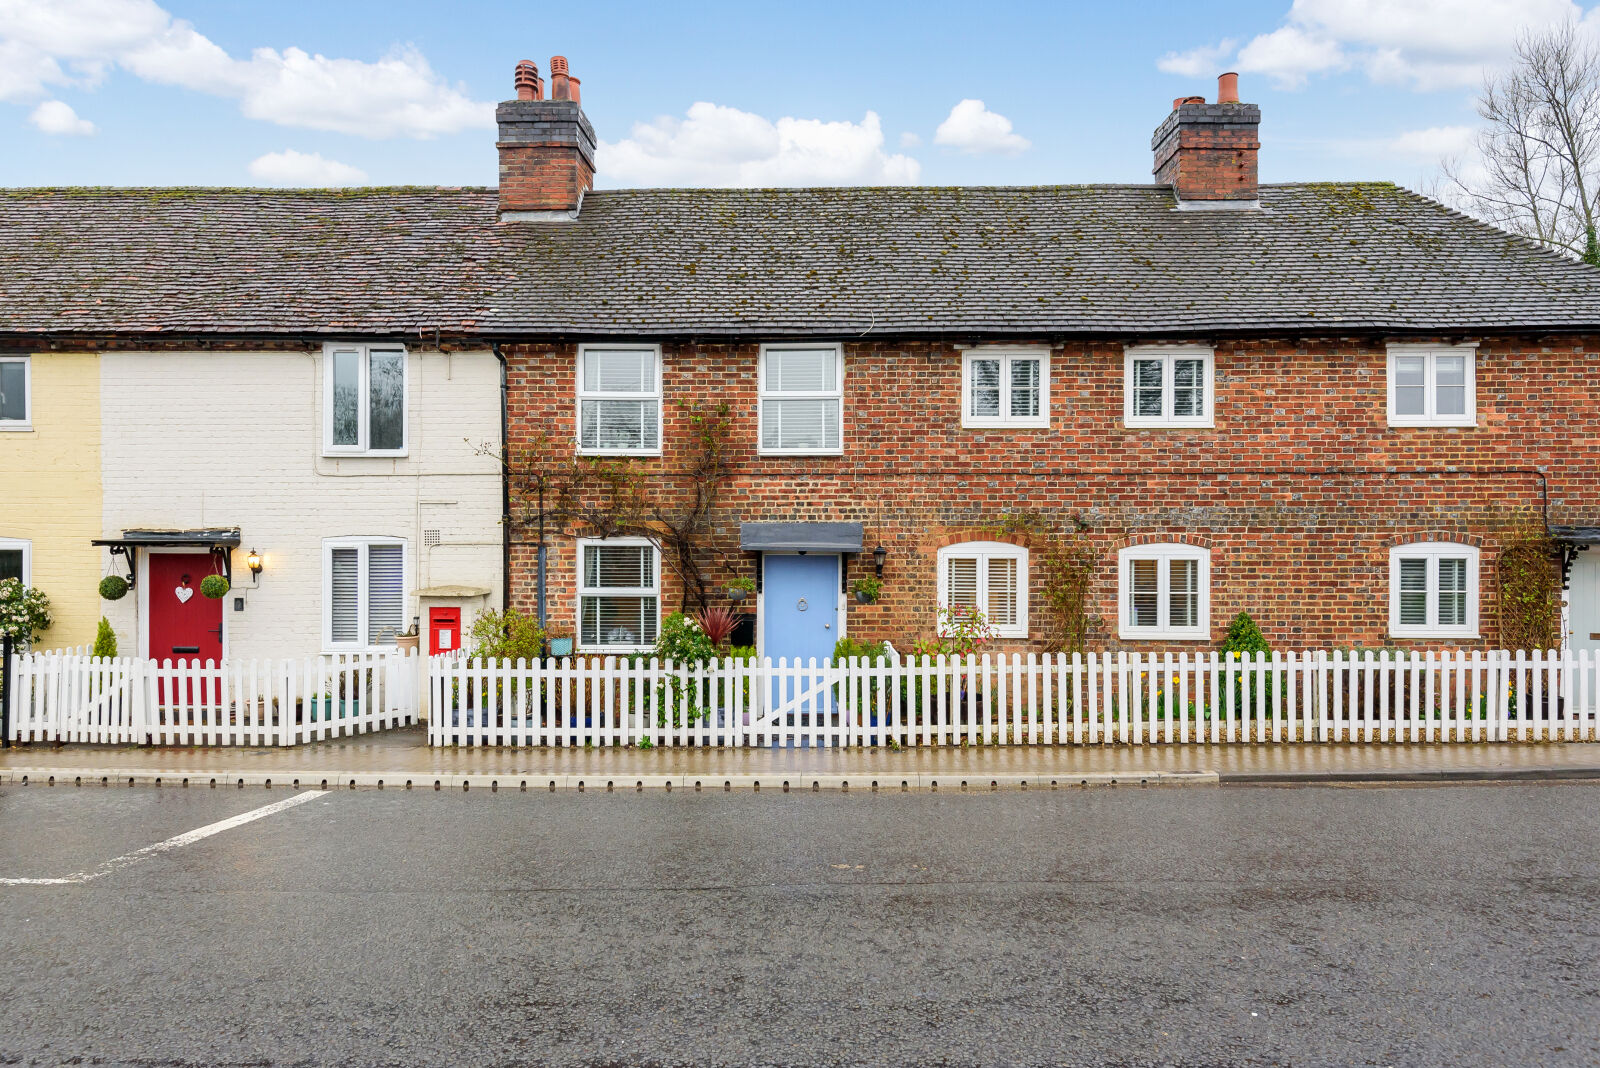 2 bedroom mid terraced house for sale Wharf Cottages, Station Road, RG7, main image